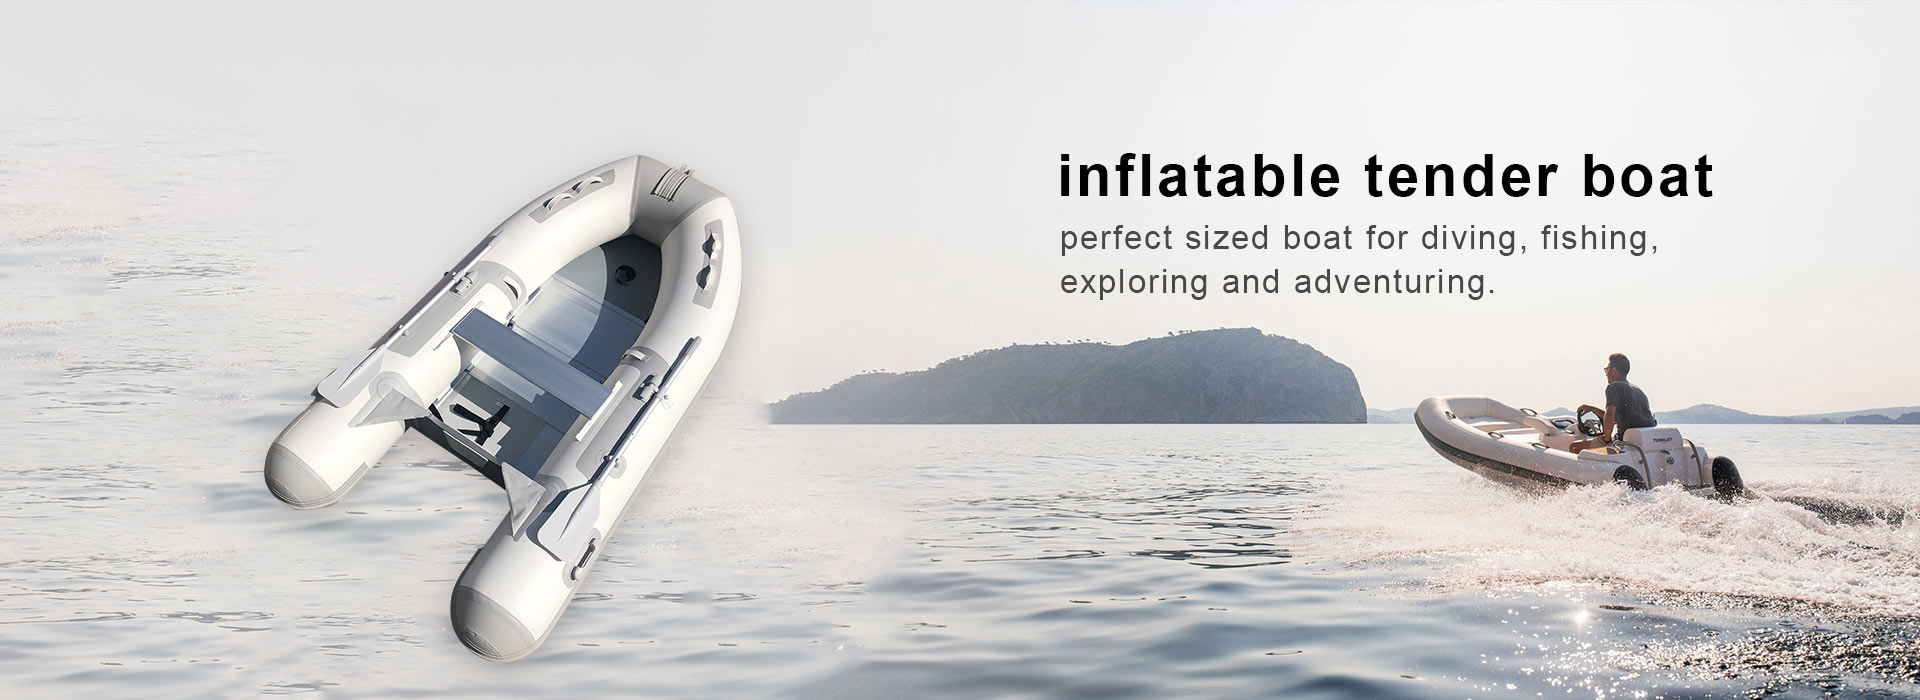 High-Quality and Reliable RIB Boat Available at Mervista - Your Trusted Source